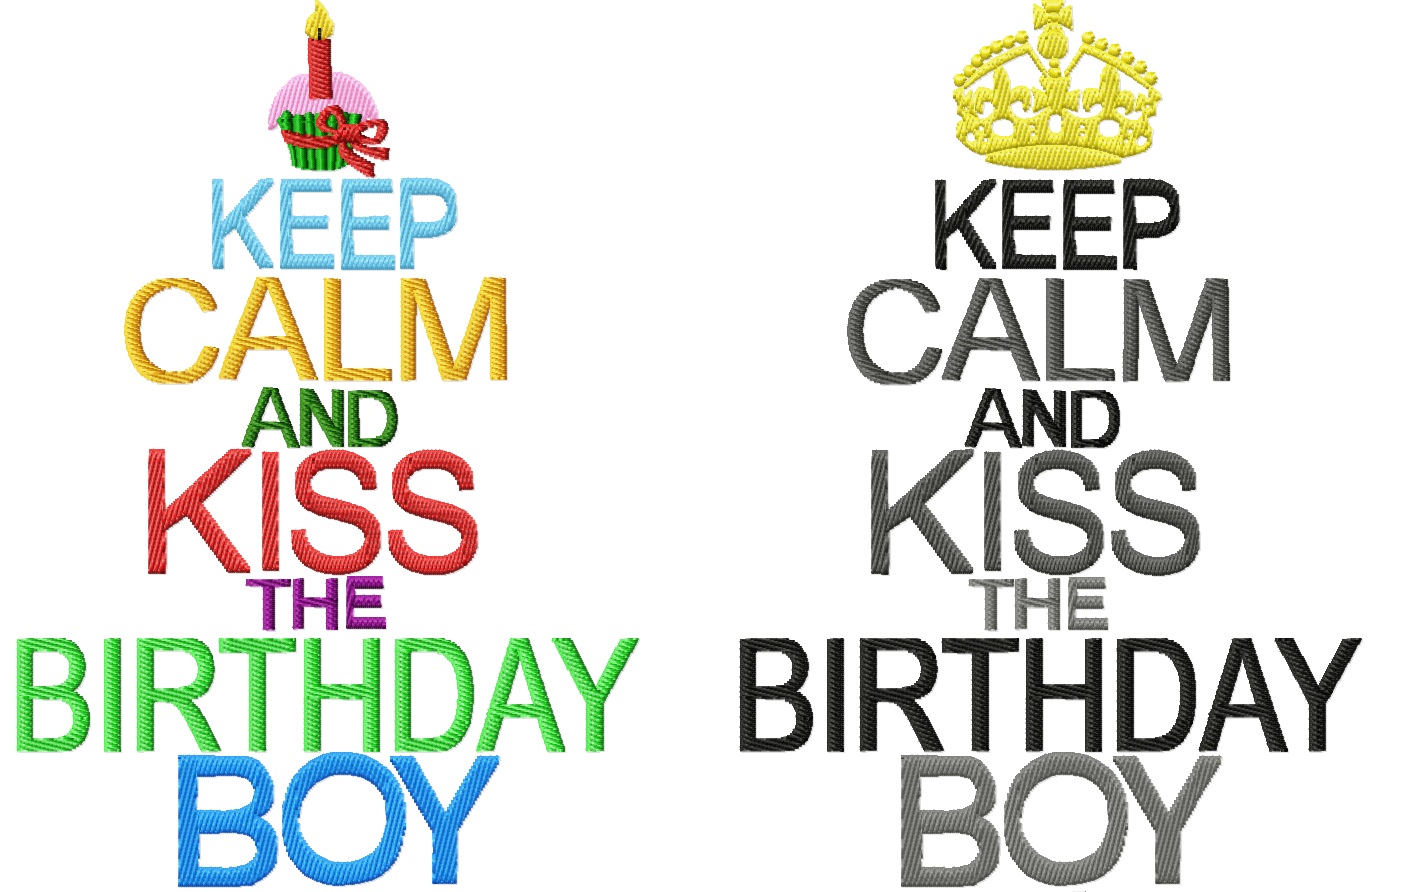 ♥KEEP CALM and KISS the BIRTHDAY BOY♥ Embroidery FILE 13x18 20x26cm 1€-SPARbie